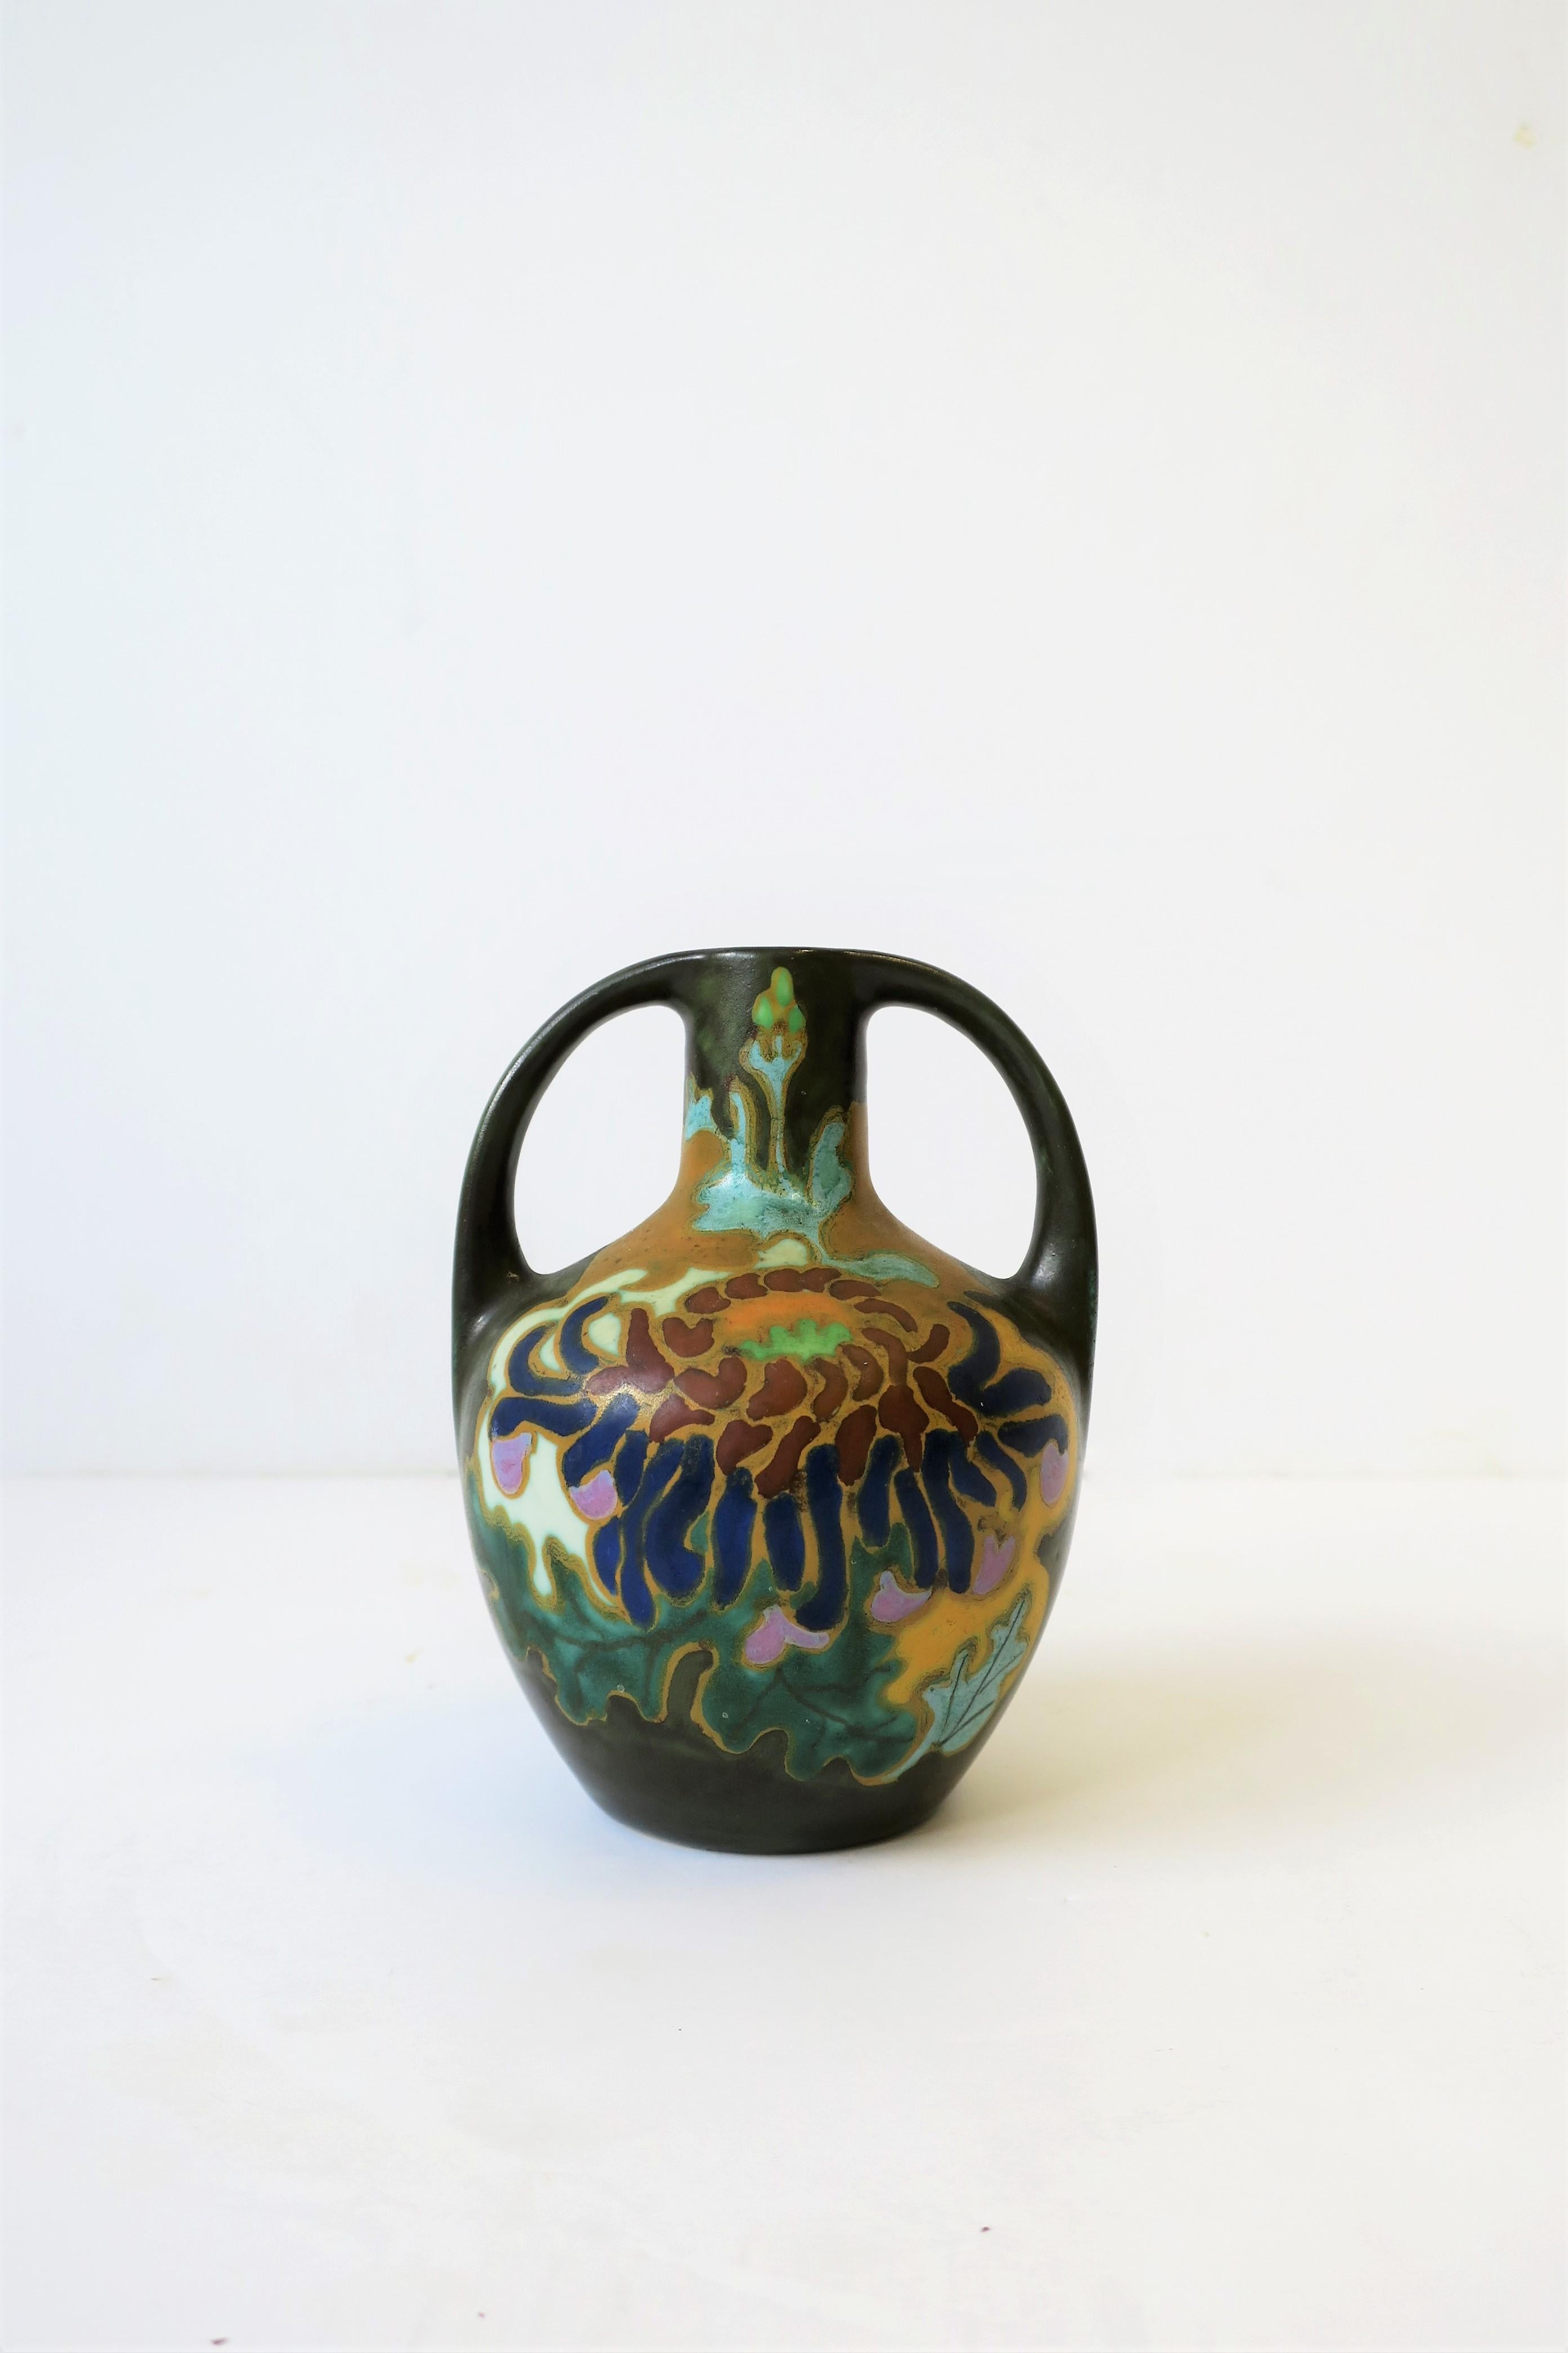 A beautiful small Art Nouveau Amphora matte pottery vase with colorful floral hand-painted design, from Holland. Piece is marked, signed, and numbered on bottom as show in image #7. 

Piece measures: 4